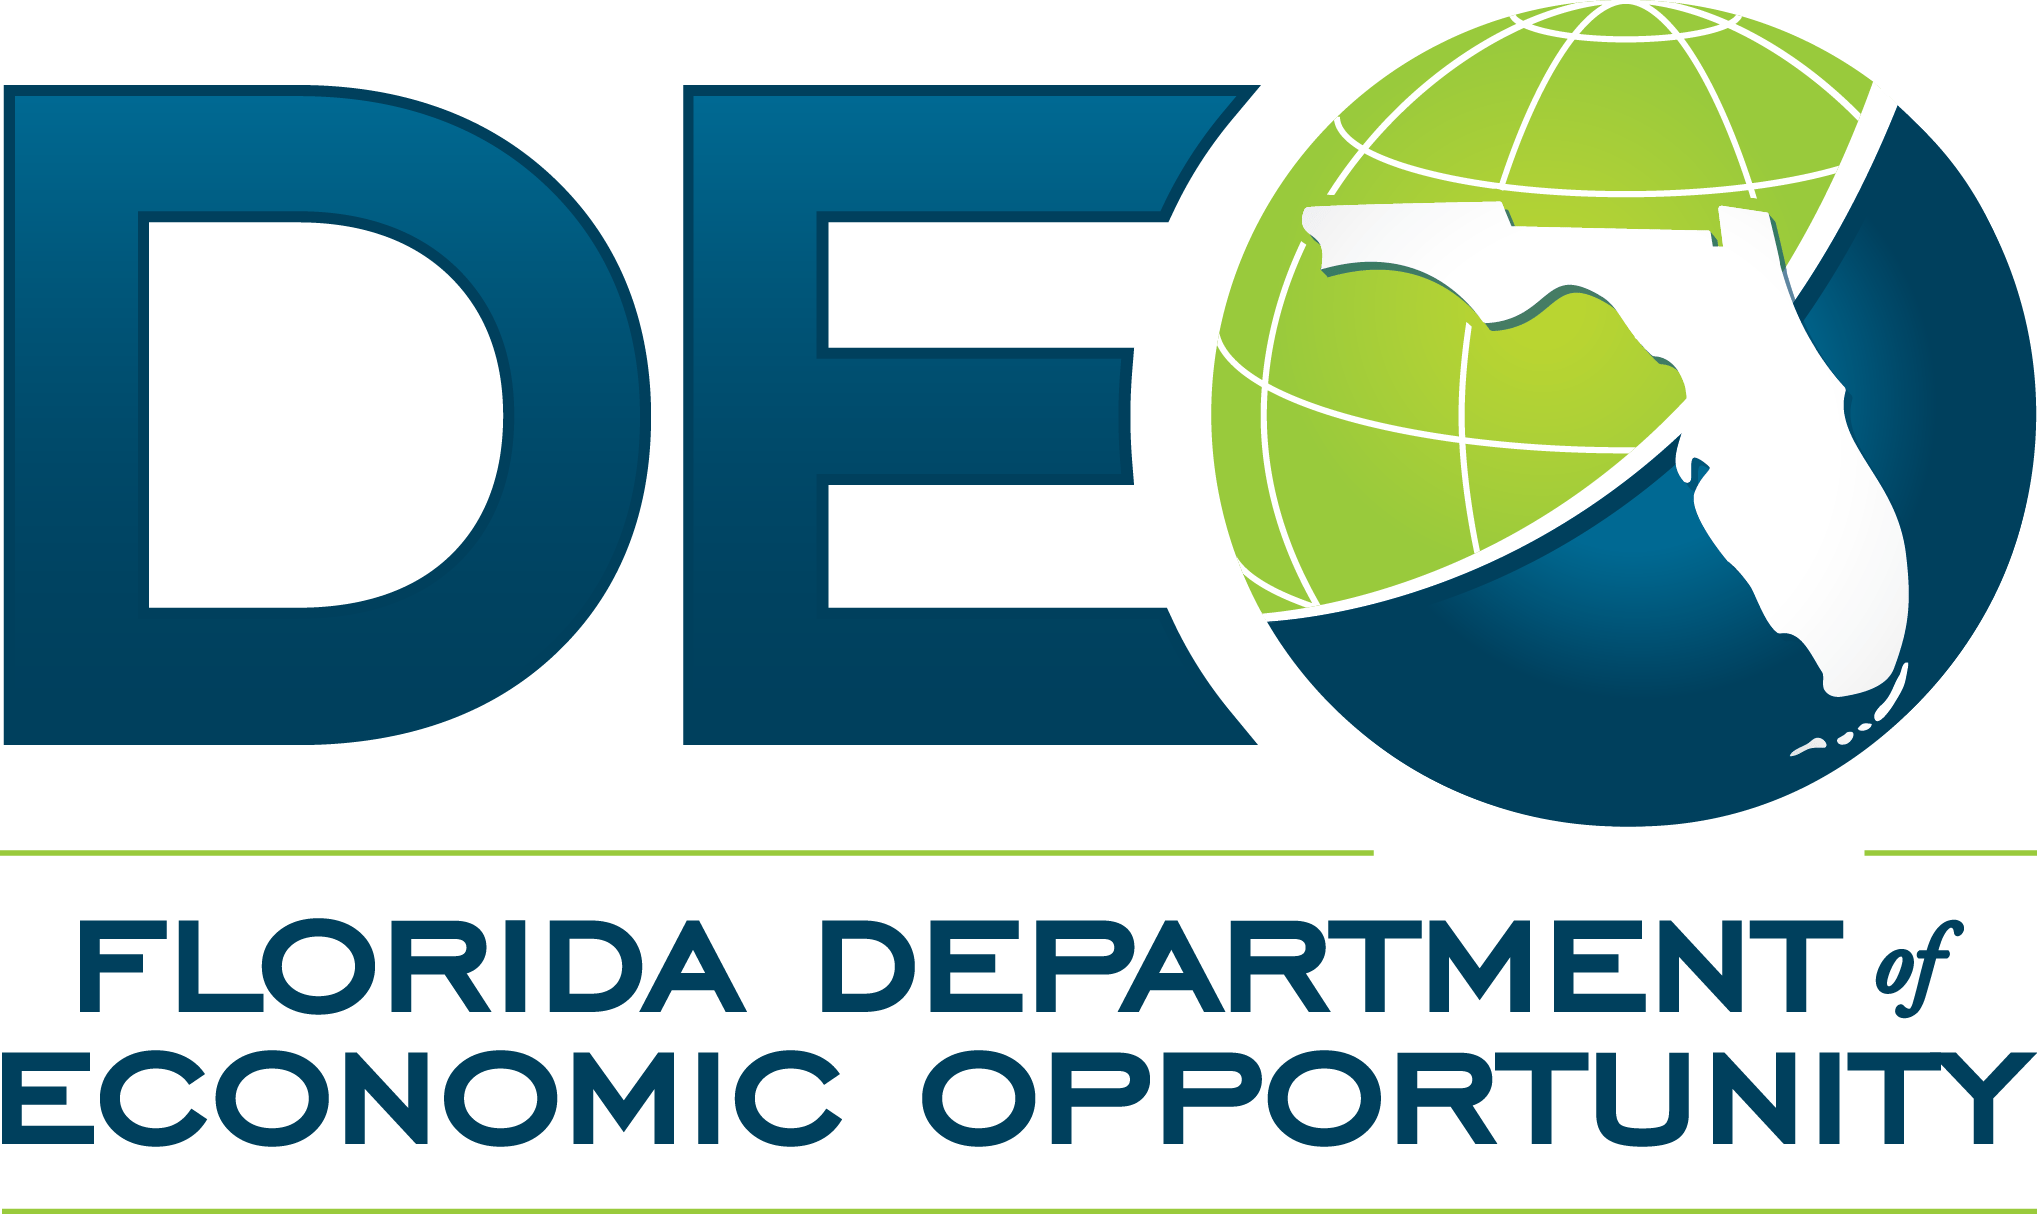 Deo Department Of Economic Opportunity - Florida Department Of Economic Opportunity (2037x1214), Png Download